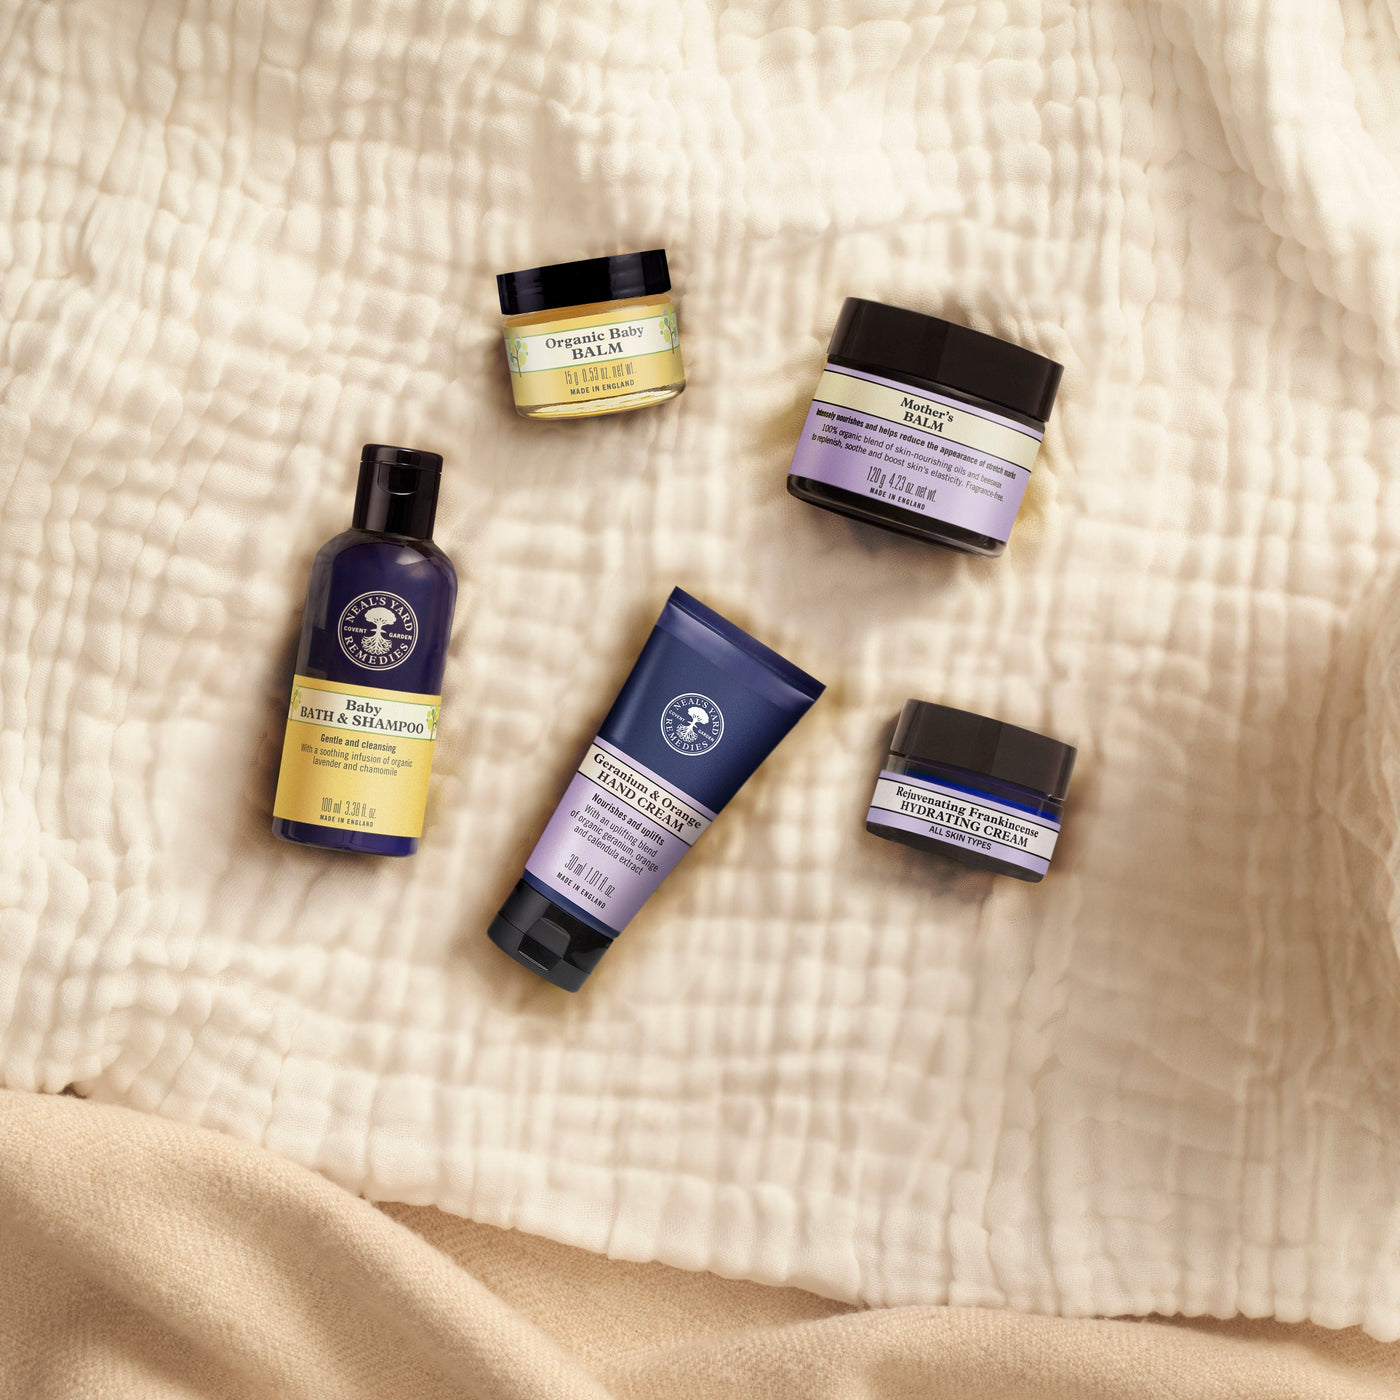 Neal's Yard Remedies Mother & Baby Travel Kit